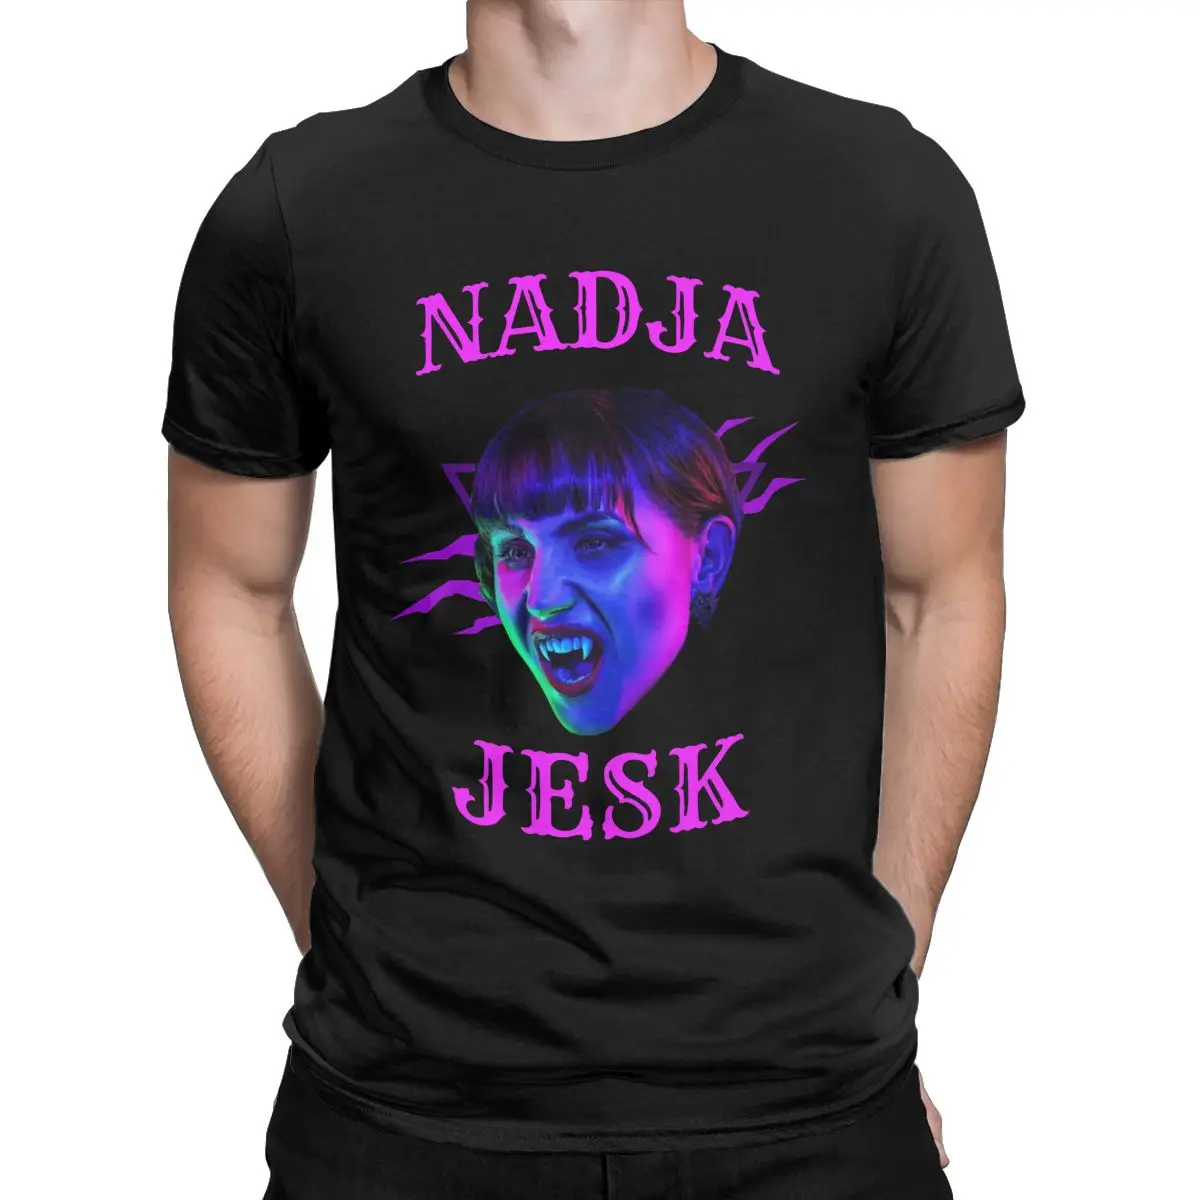 

Jesk Nadja What We Do In The Shadows Men's shirt Casual Tee Shirt Short Sleeve O Neck T-Shirts Pure Cotton Summer Clothing